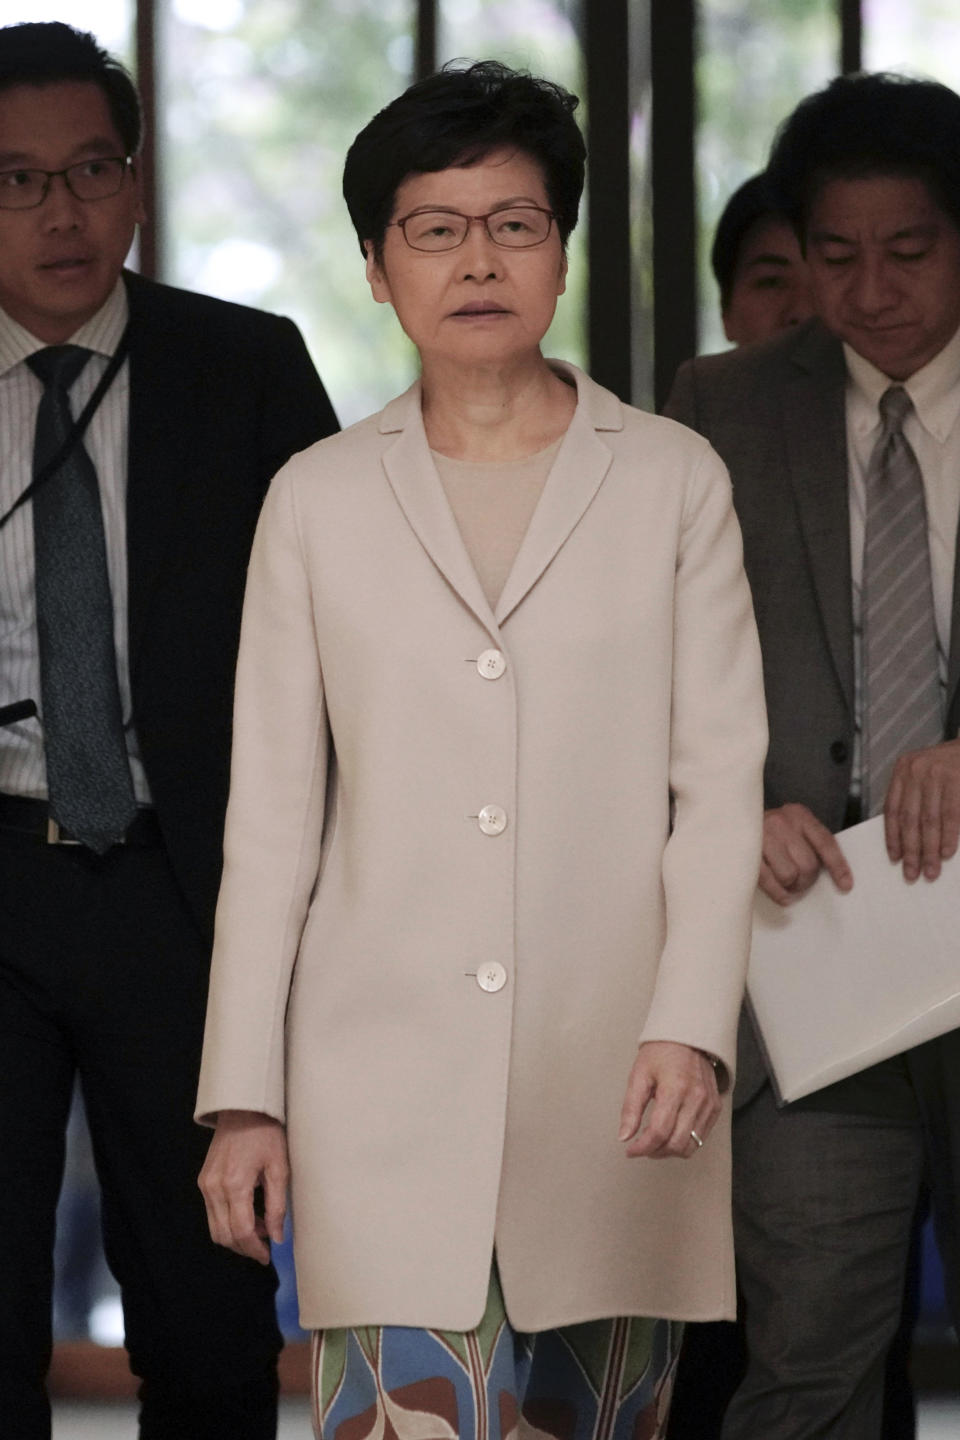 Hong Kong Chief Executive Carrie Lam, center, arrives for a press conference in Hong Kong, Tuesday, Nov. 26, 2019. Lam has refused to offer any concessions to anti-government protesters after a local election setback. (AP Photo/Vincent Yu)